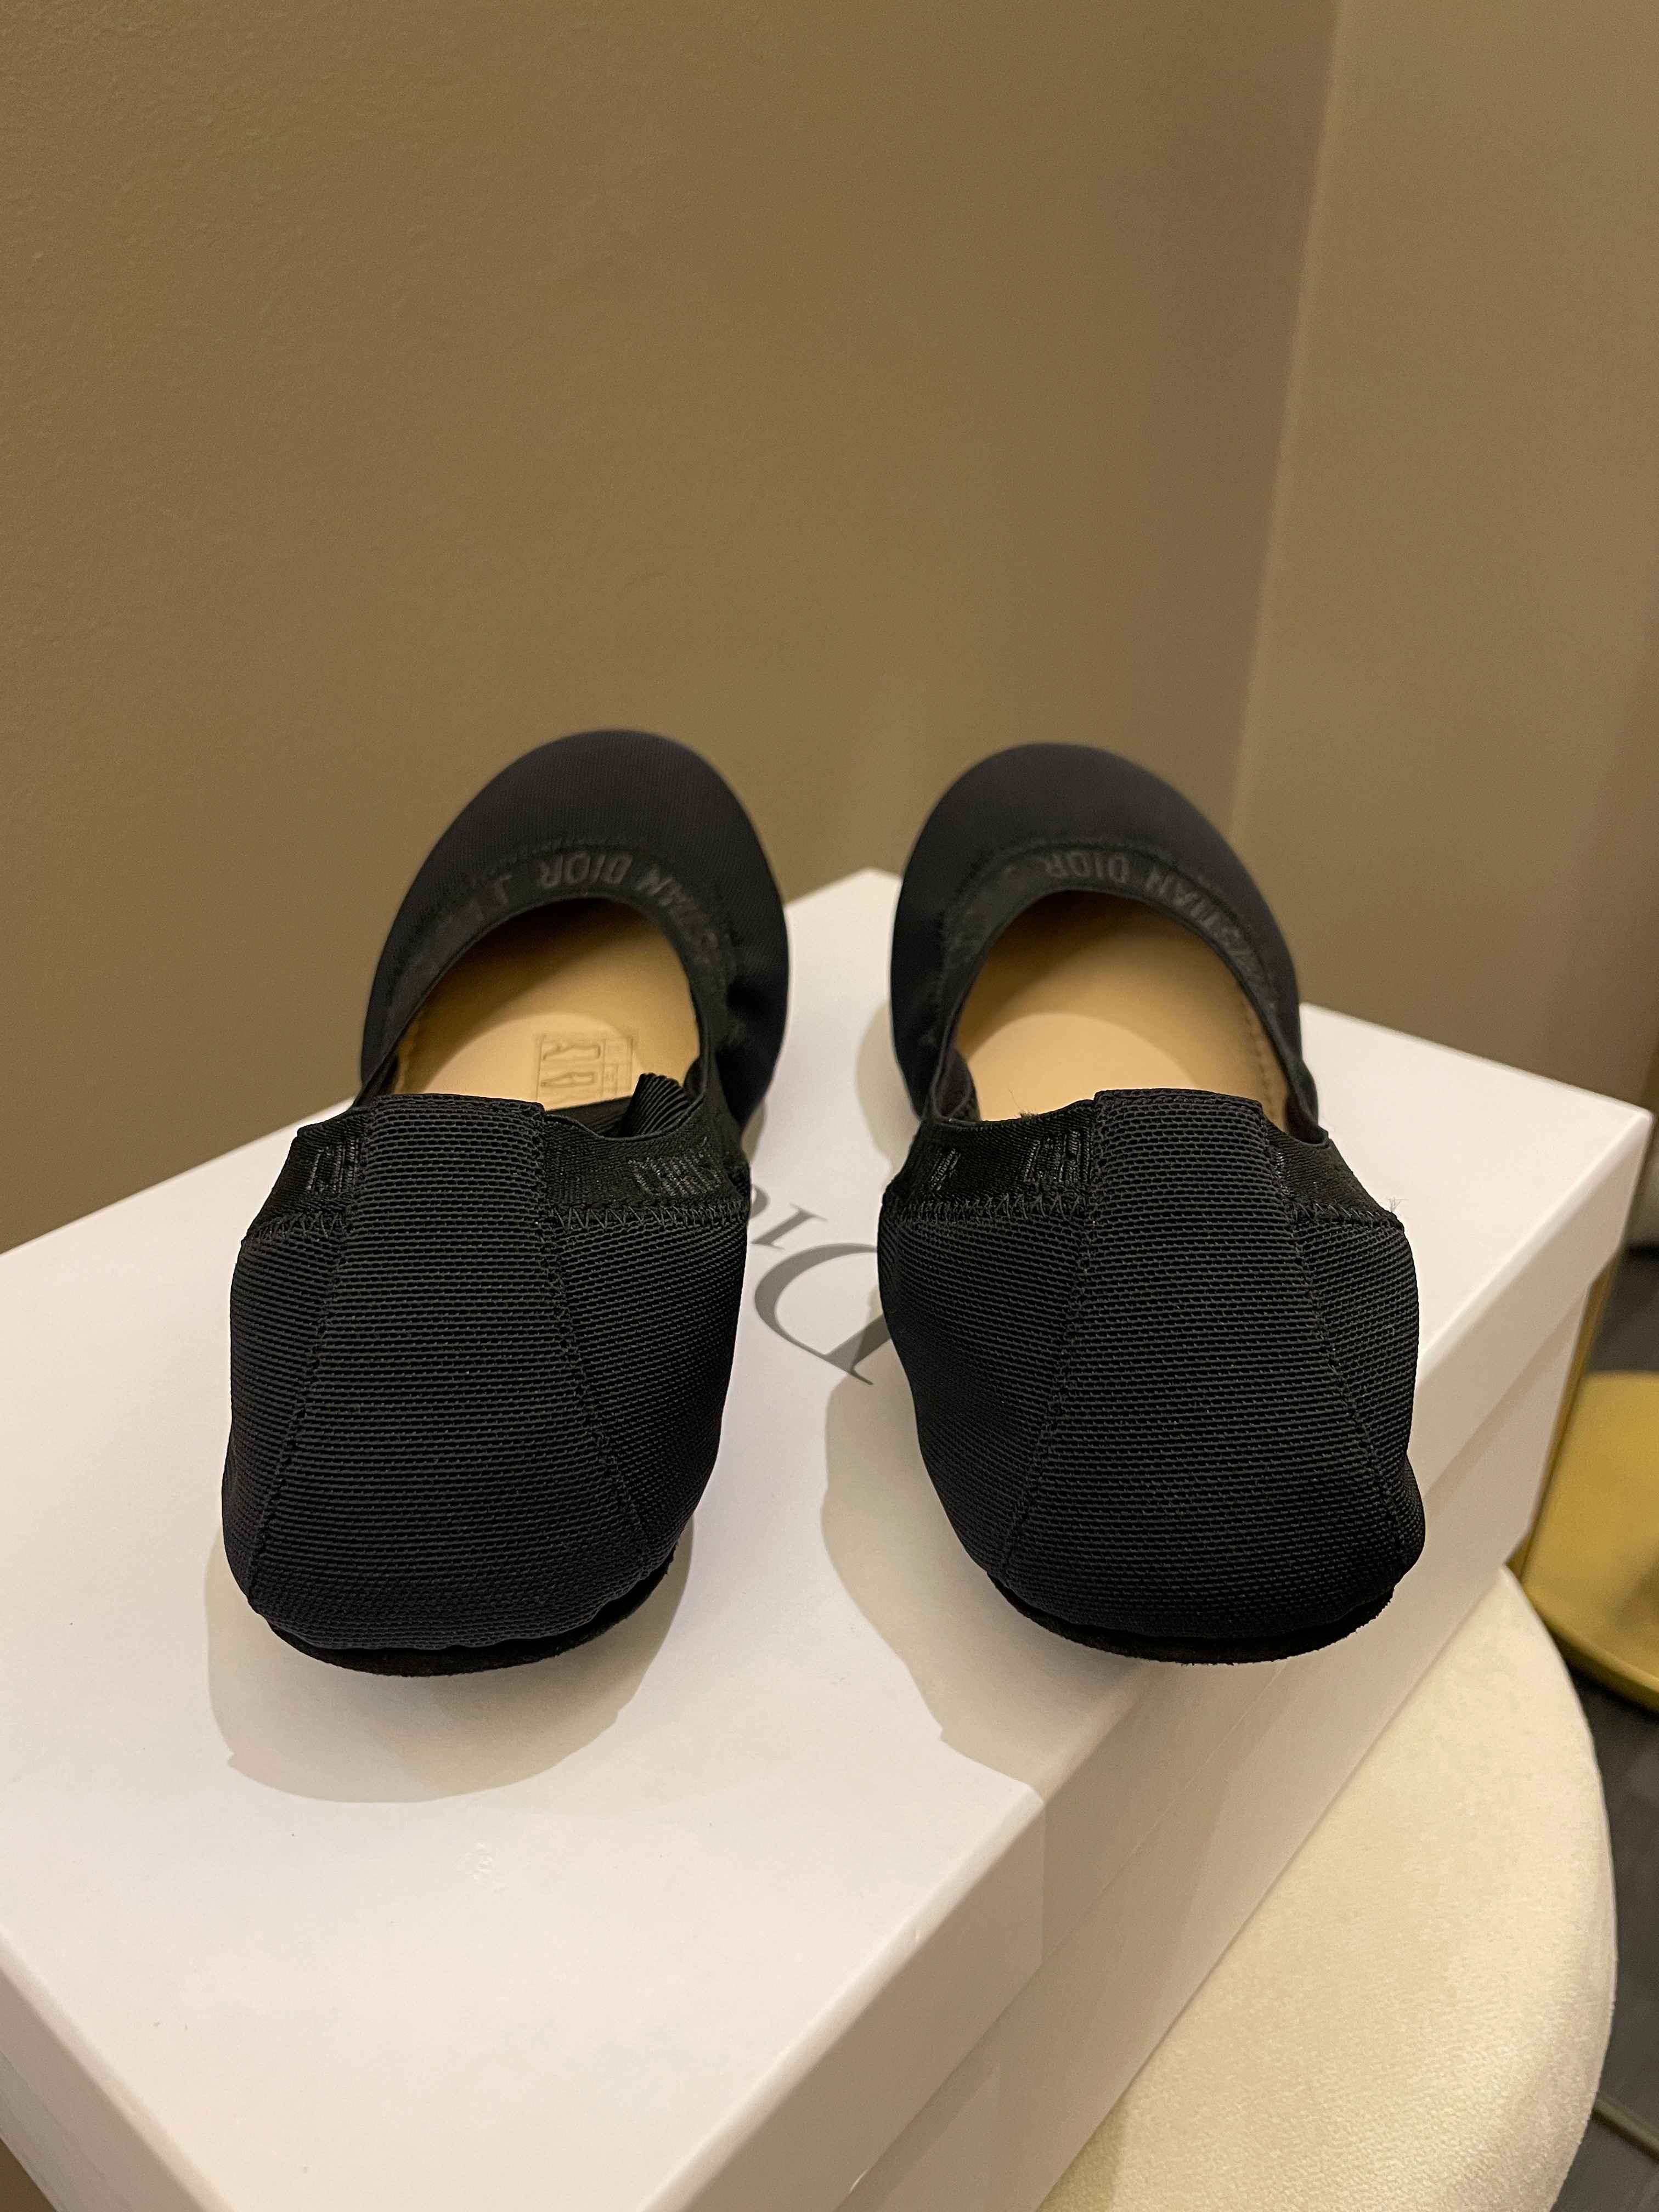 Dior Academy Lace Up Ballerina Black Size 36